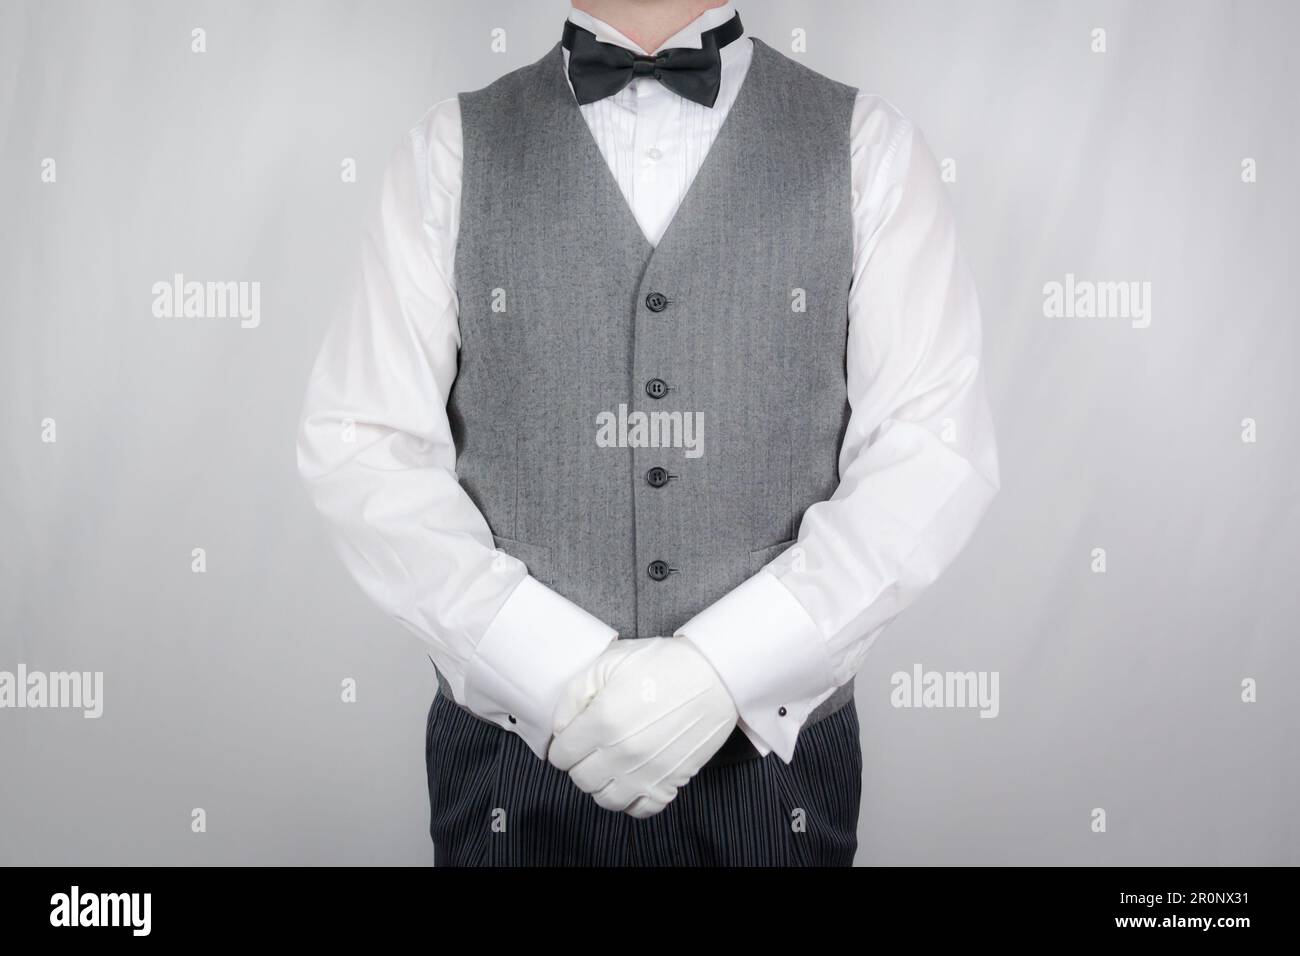 Portrait of Butler or Waiter in Gray Vest and White Gloves Standing and Respectful Attention. Service Industry and Professional Hospitality. Stock Photo